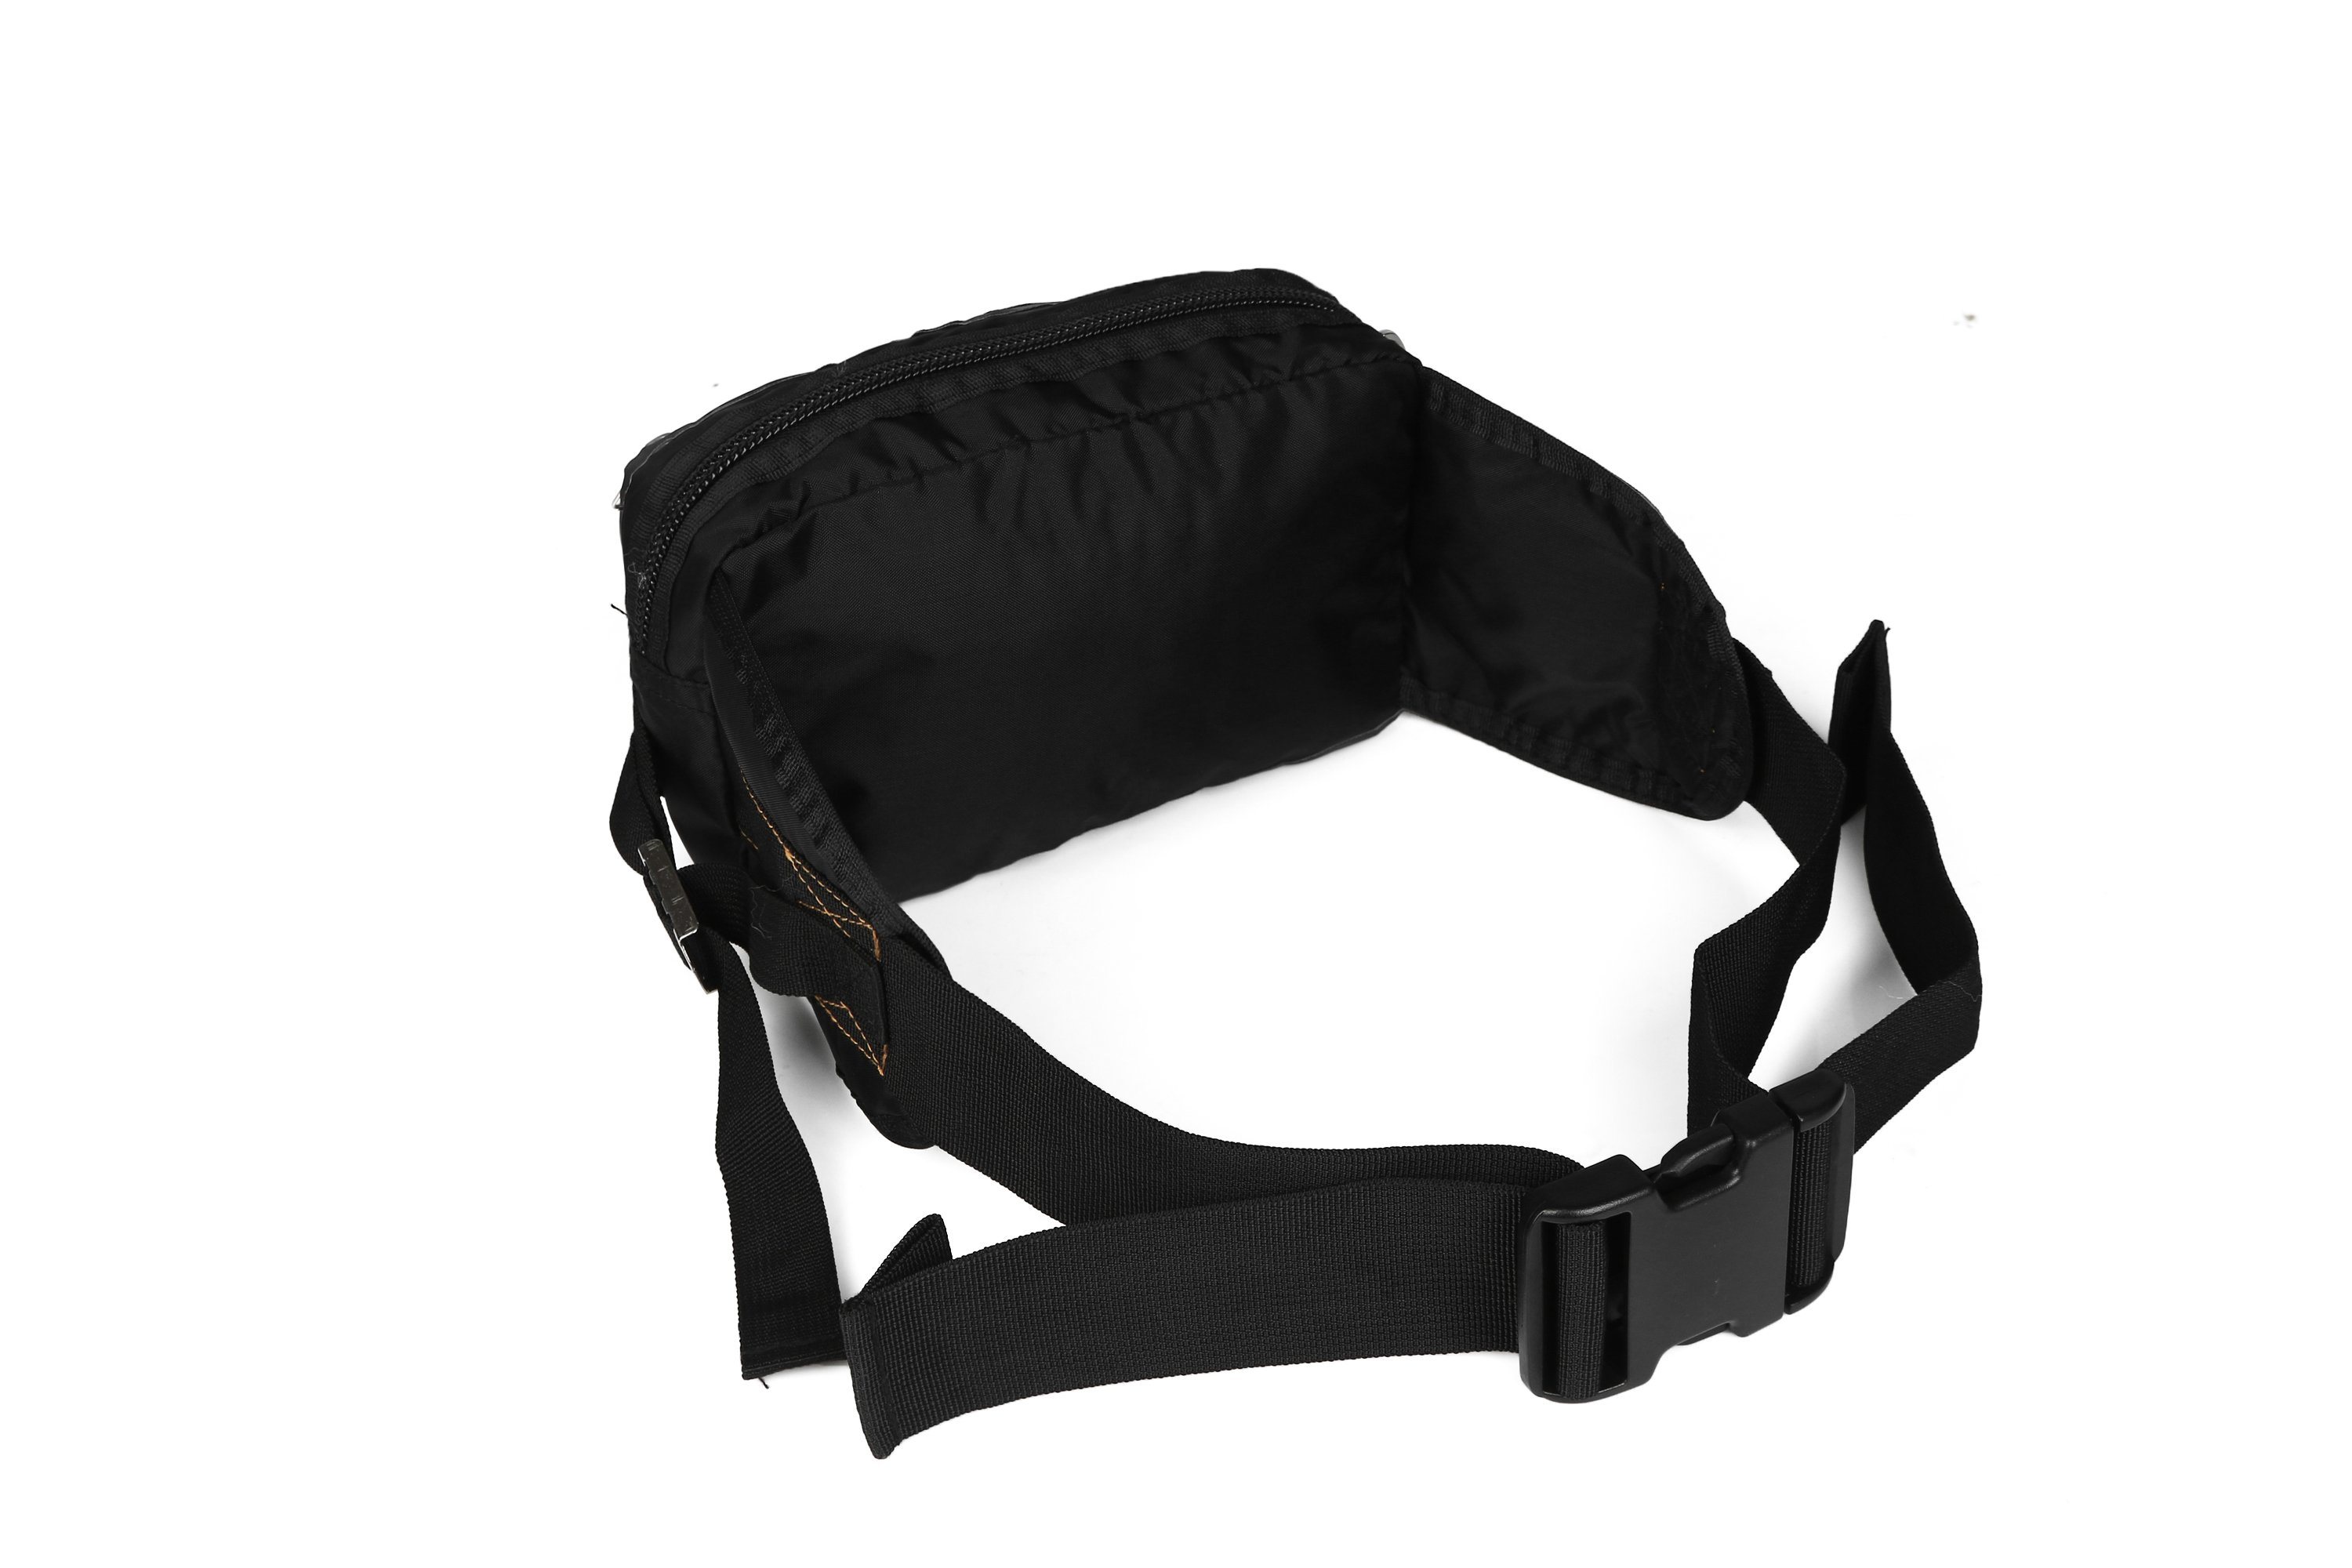 New Arrival in Stock Stylish Waterproof Military Tactical Parachute Waist Bag